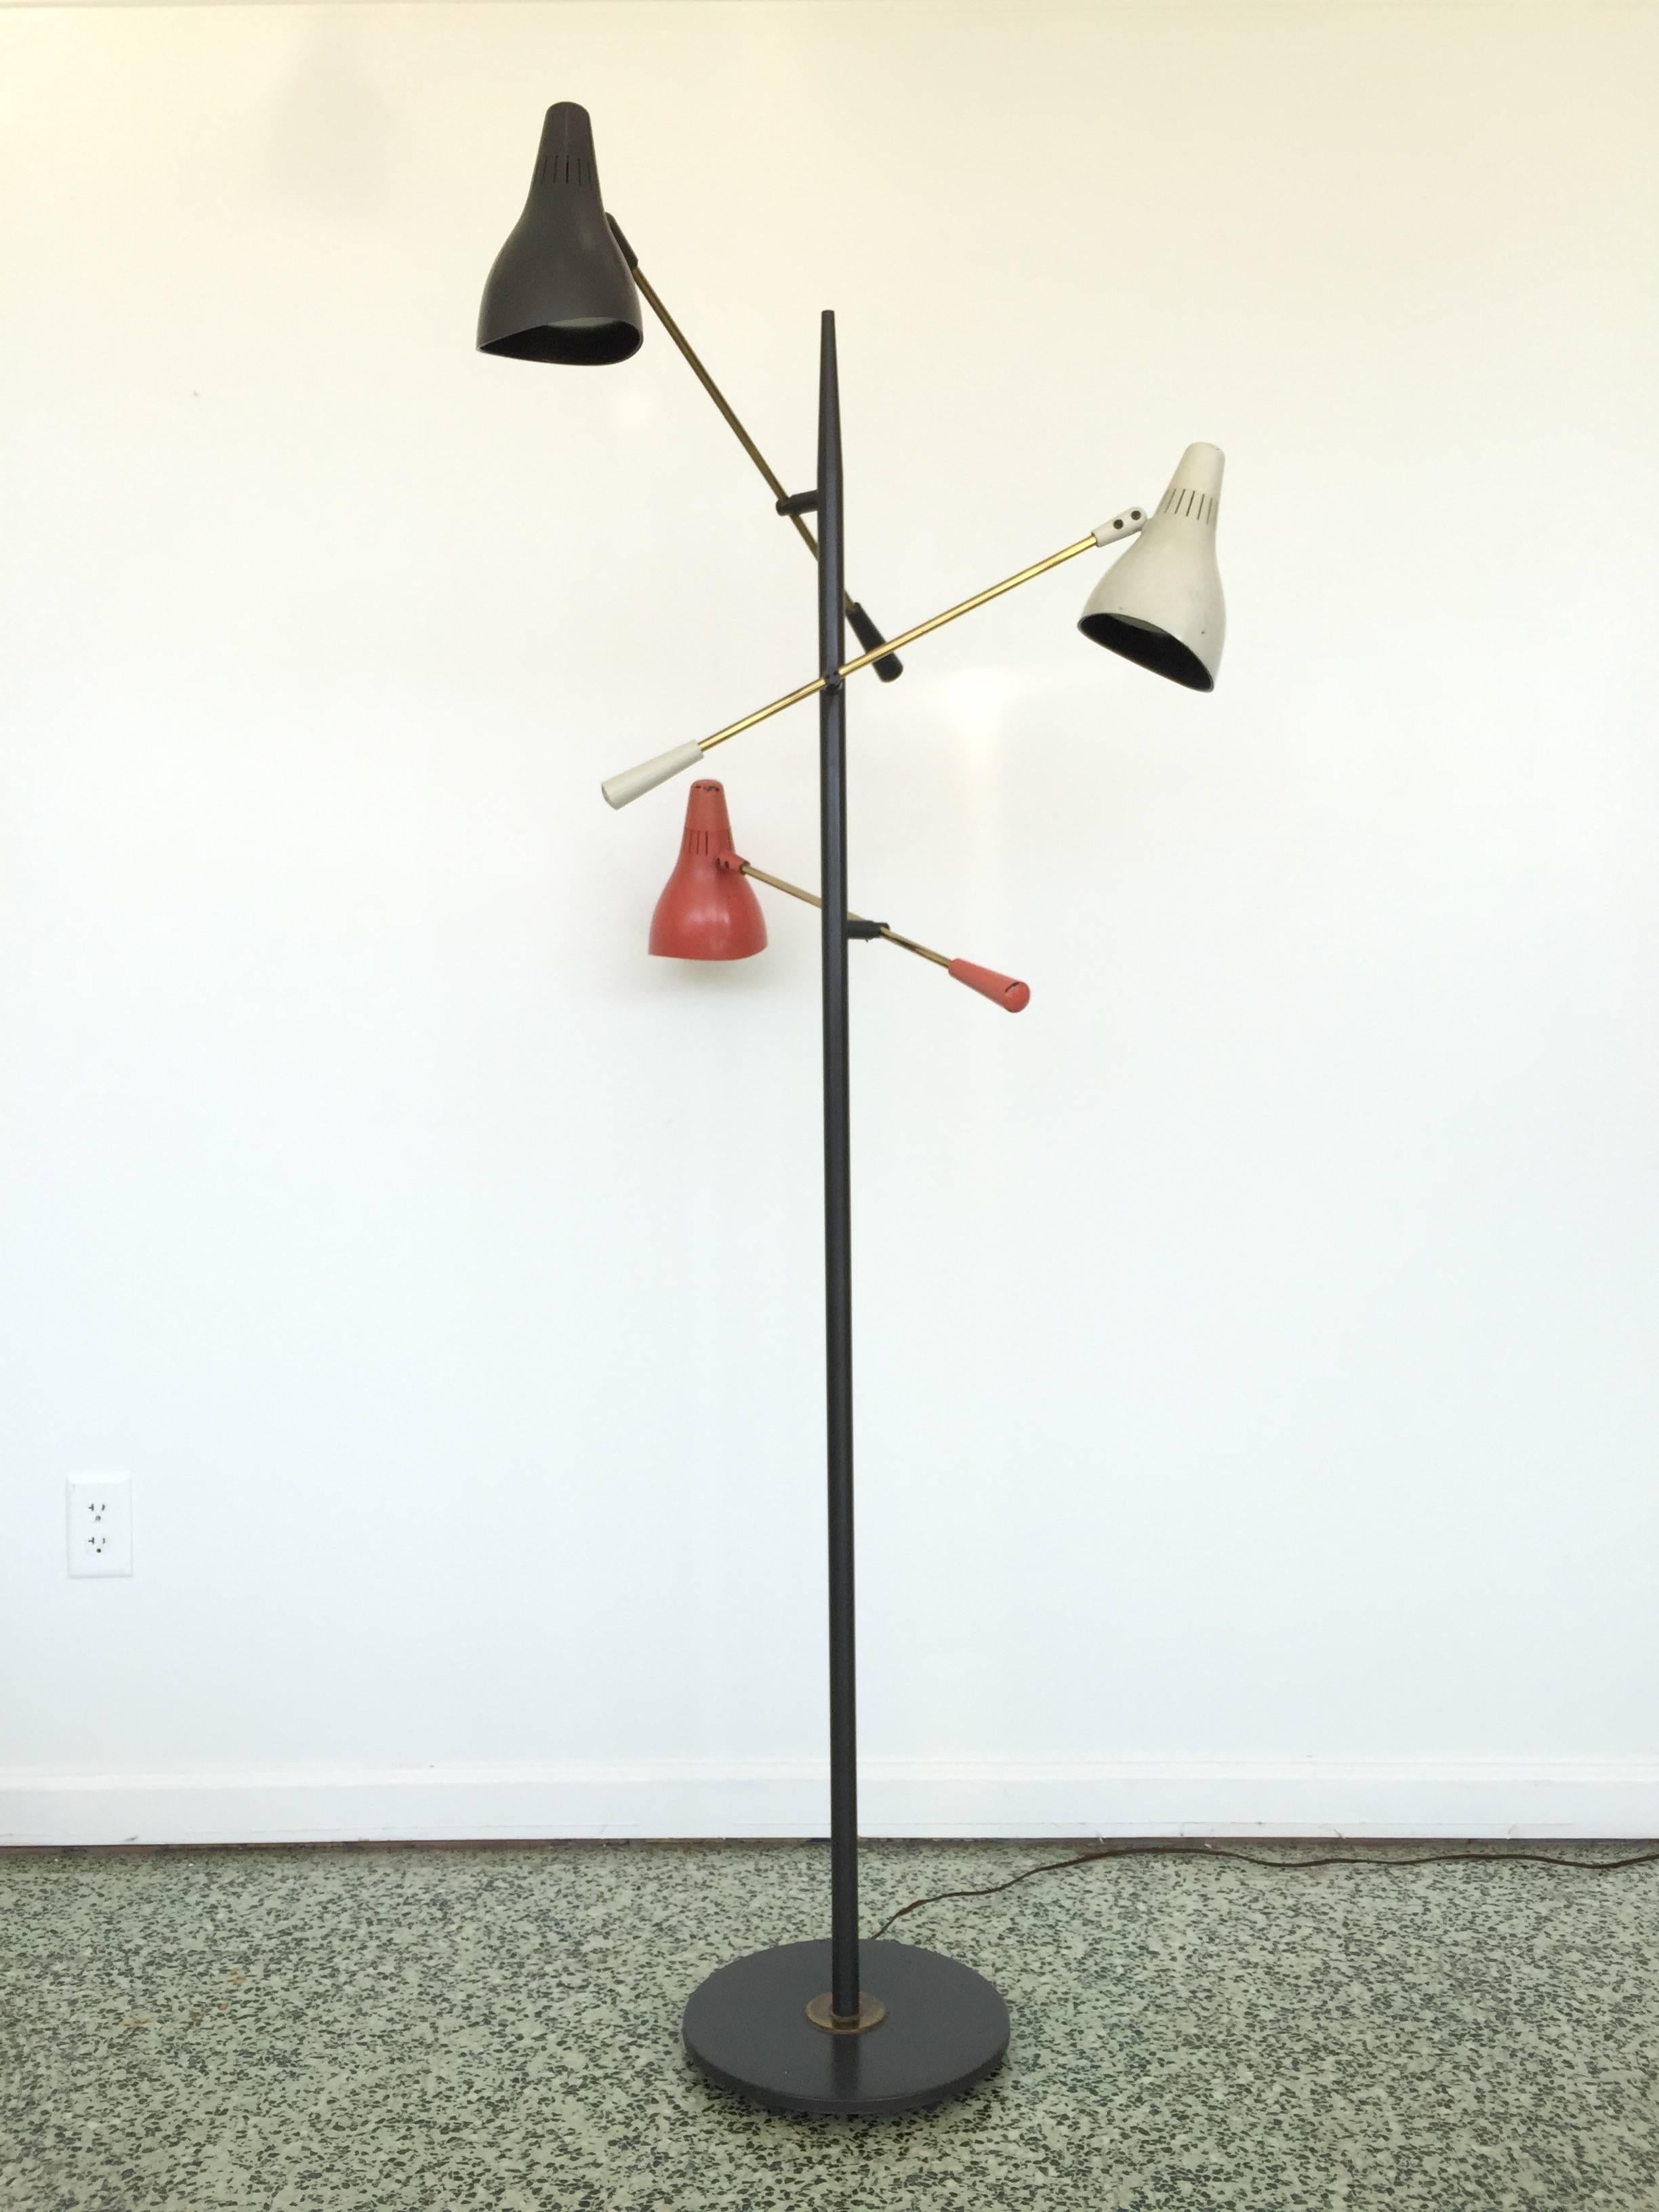 Rare mid-century floor lamp designed for Lightolier with adjustable arms, shades with enamel center post.